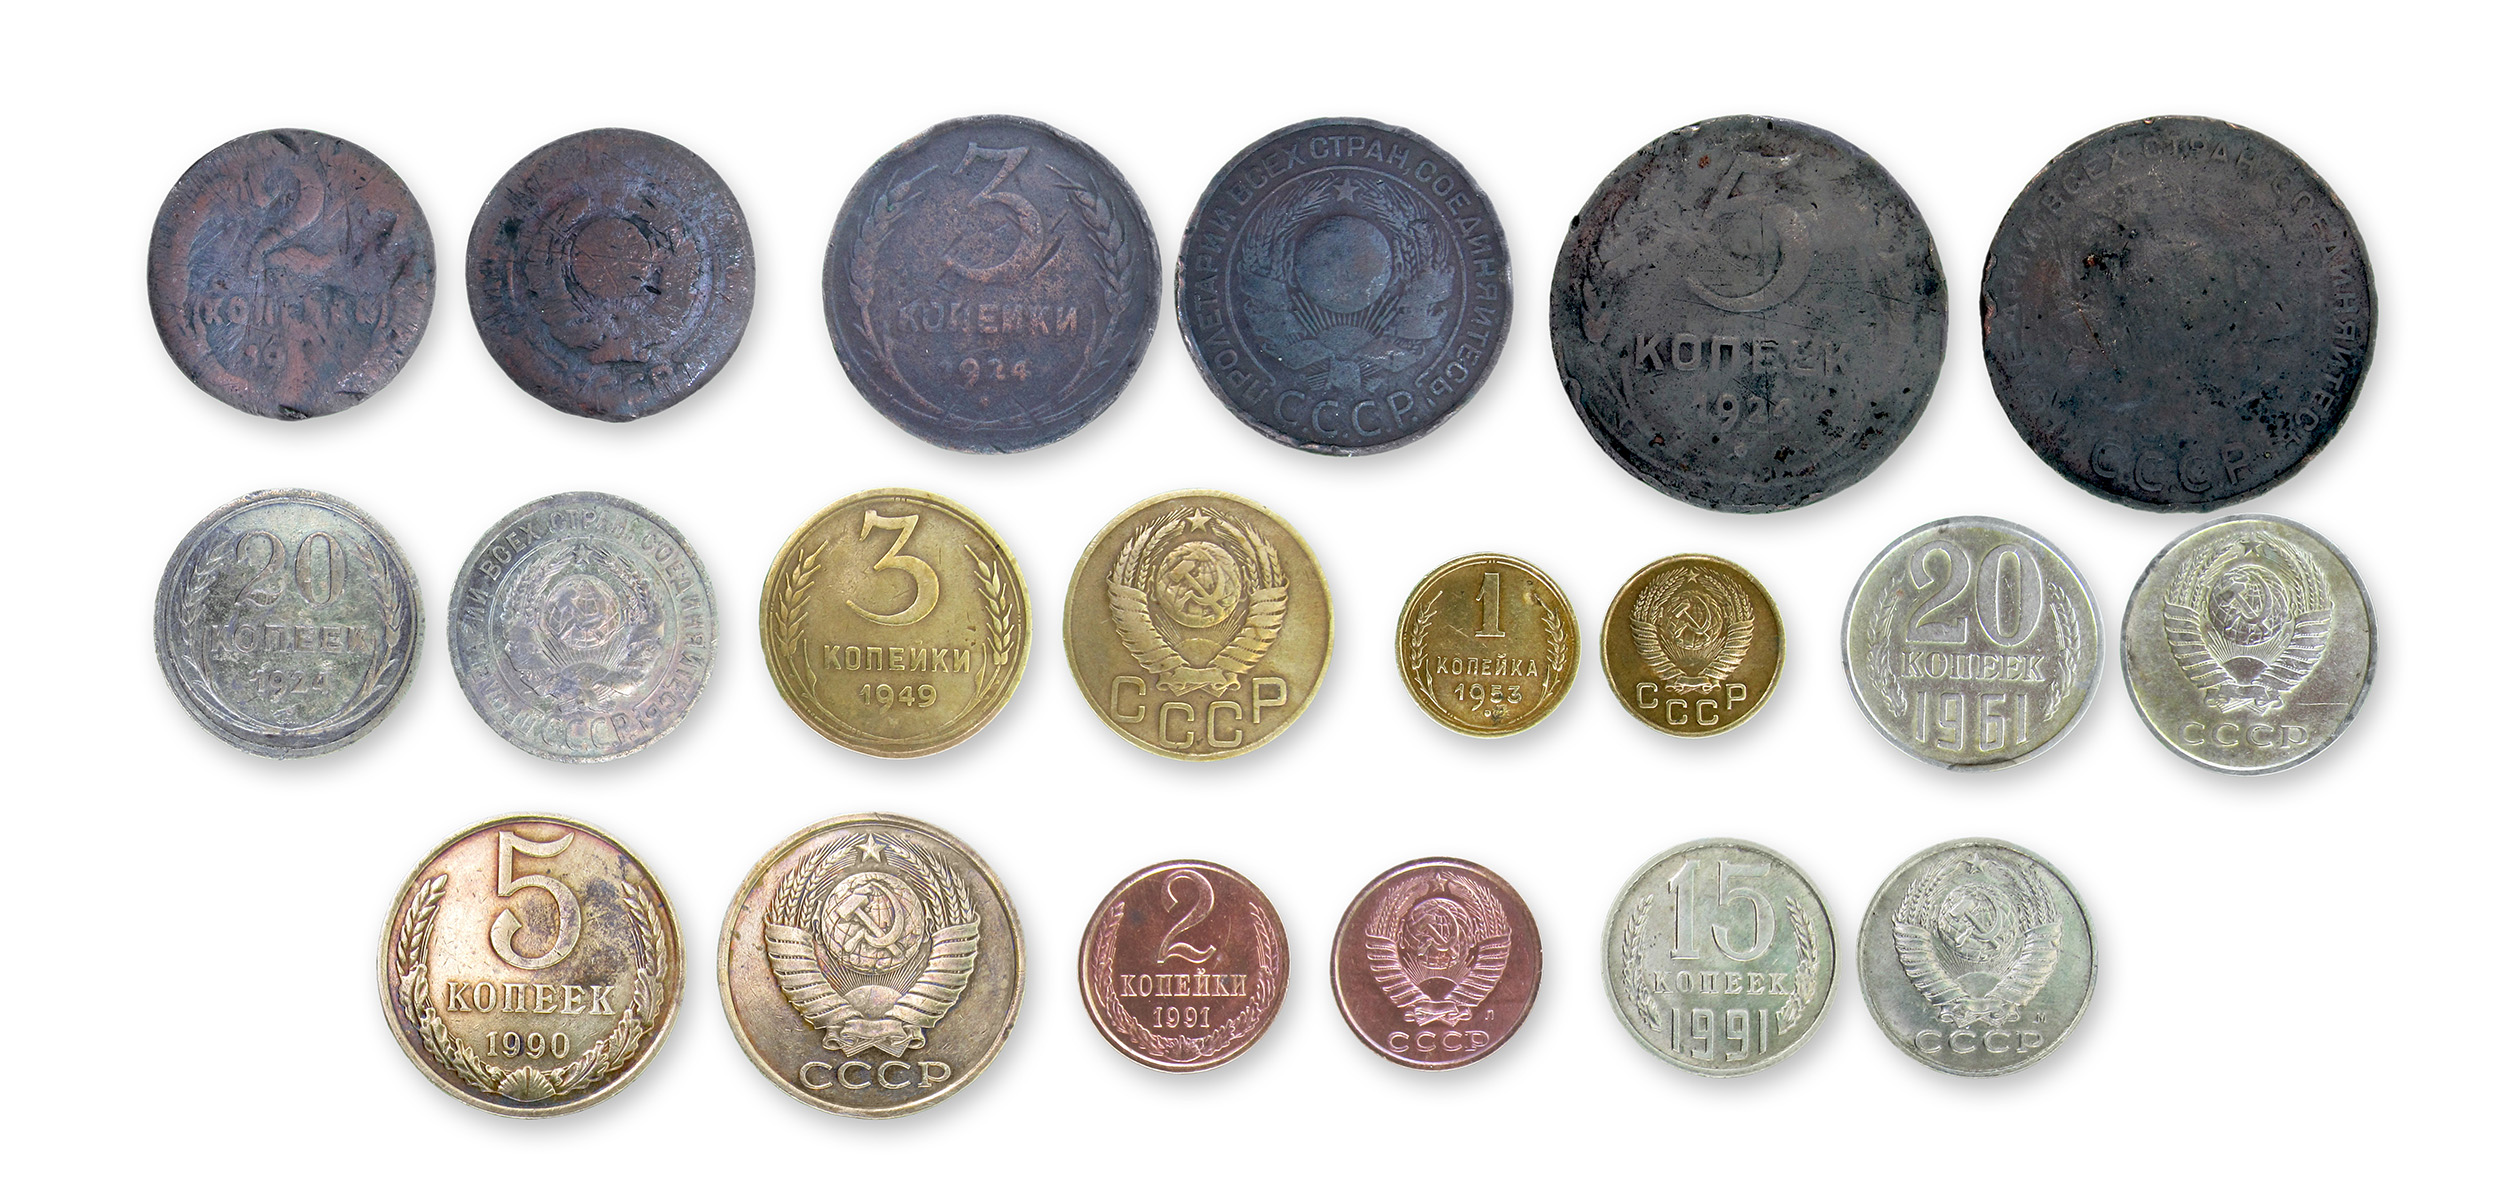 HiBid Hosts More Than 1,500 Auctions Last Week, With Silver, Gold, Rare Coins, Trading Cards & Fine Art Now Up For Bid